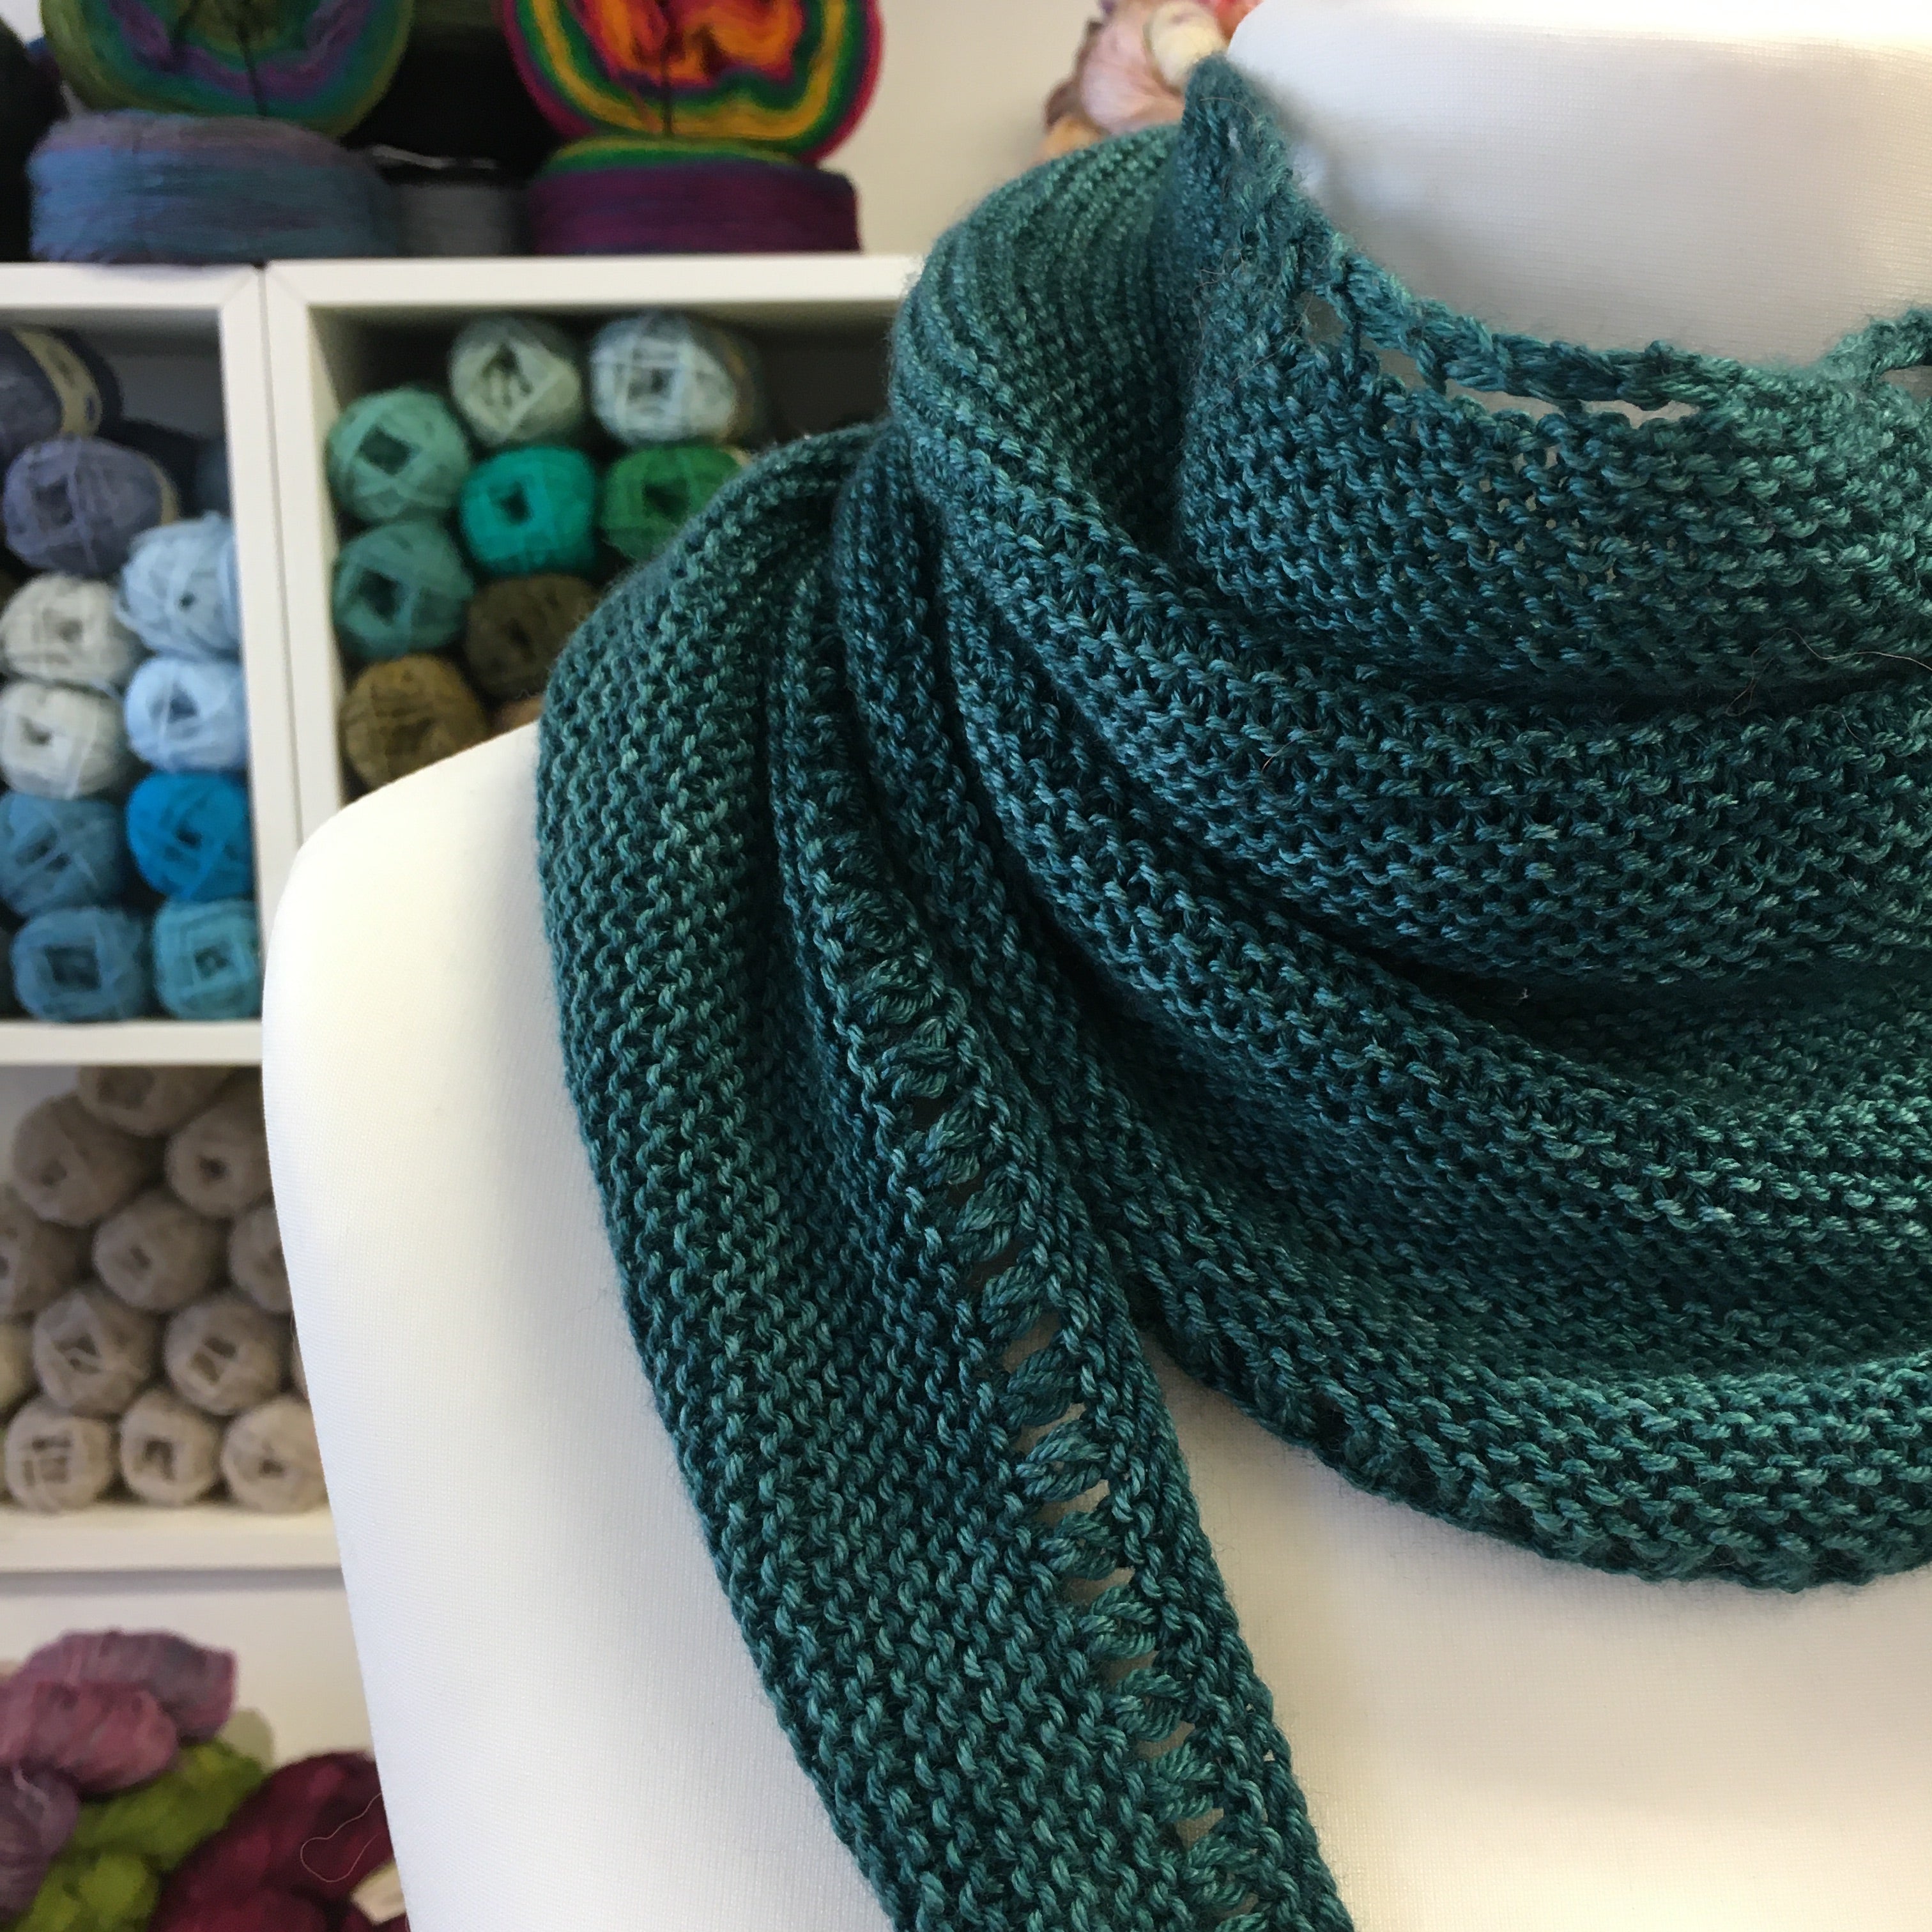 The Fall Shawlette is on our blog ready for you to cast on. The